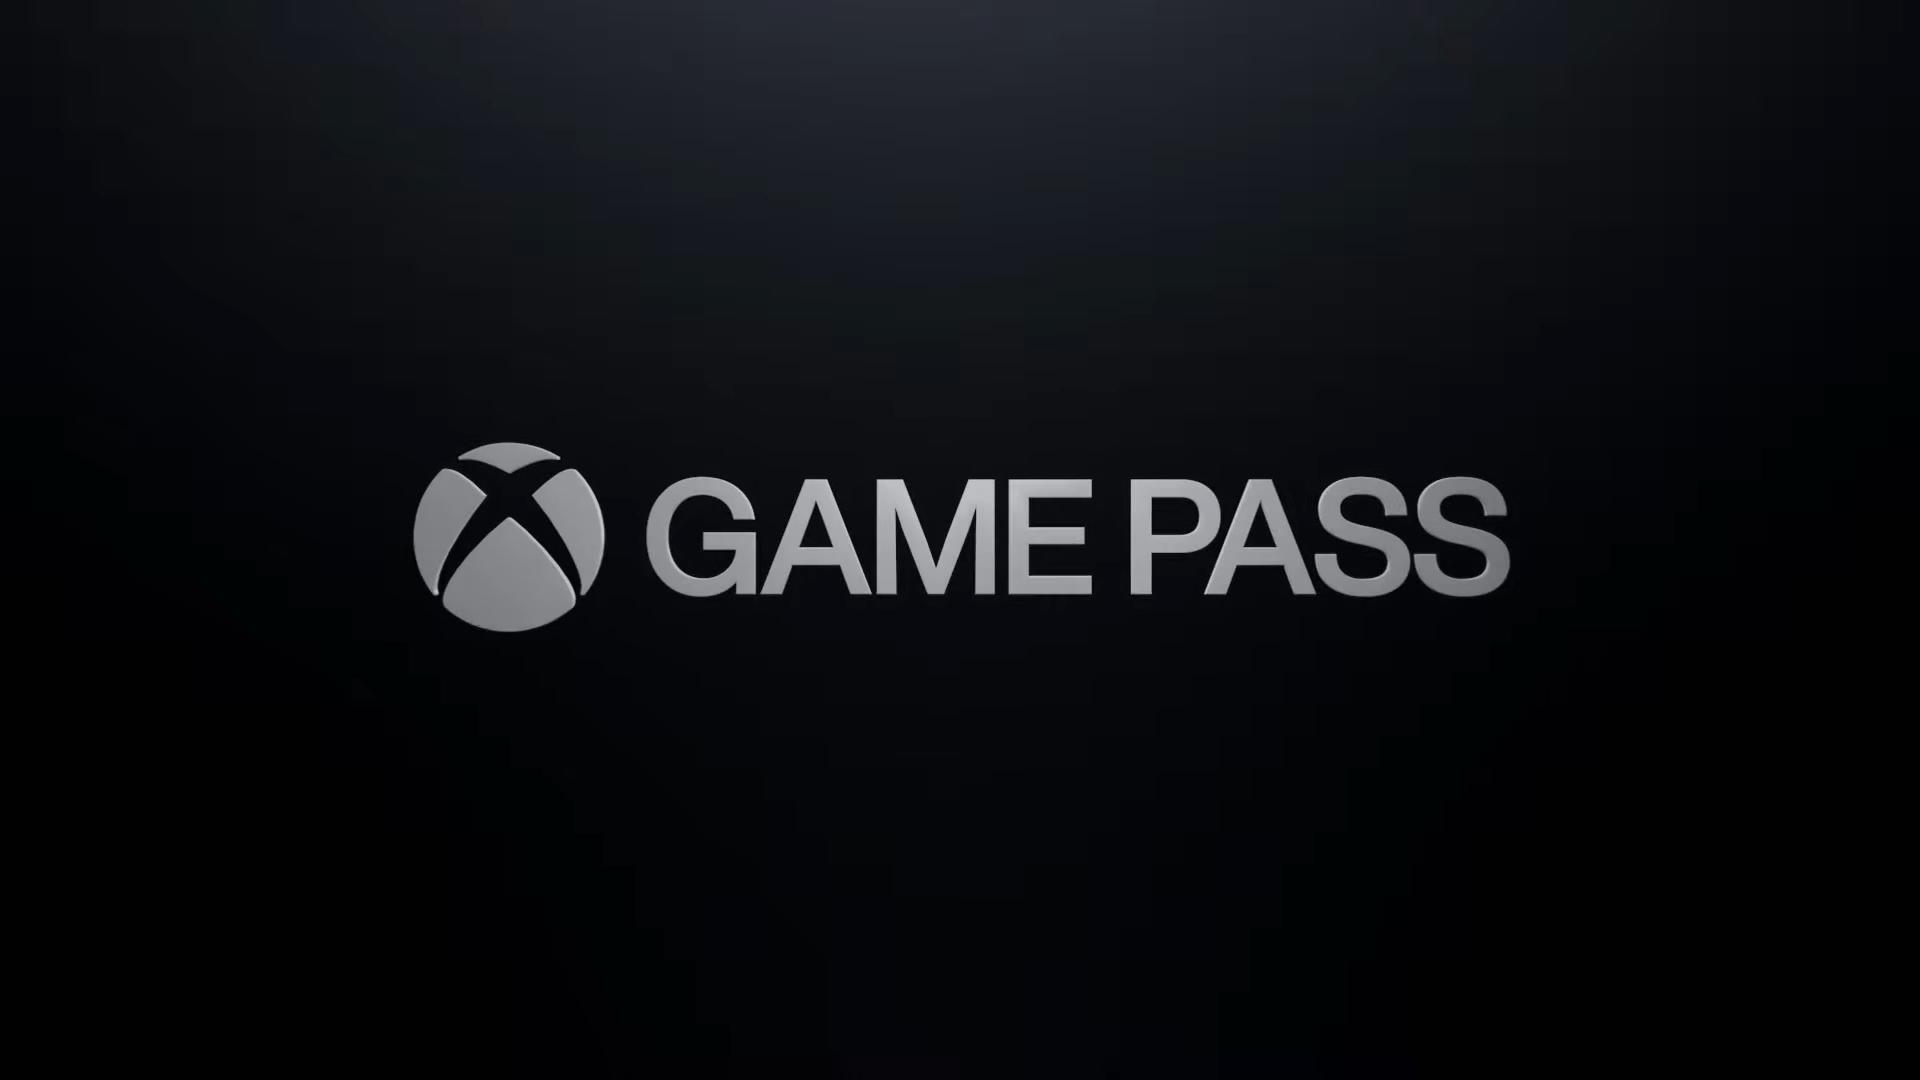 Microsoft could introduce a cheaper, ad-supported Game Pass
tier, survey suggests